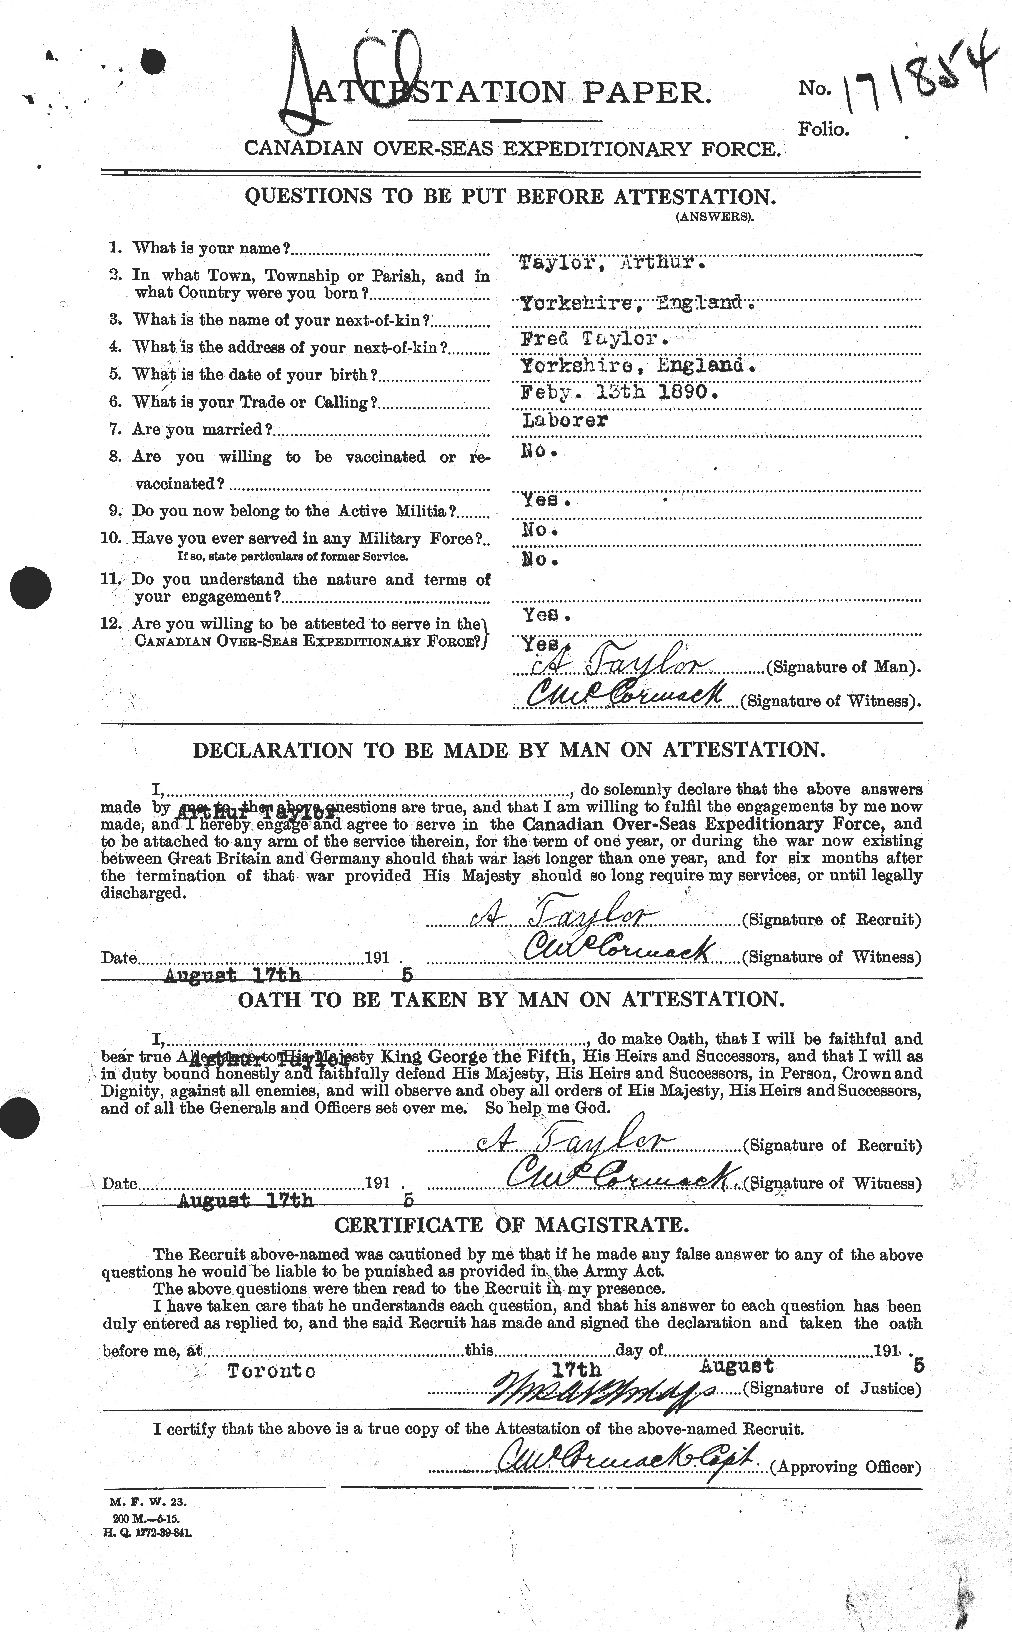 Personnel Records of the First World War - CEF 626257a